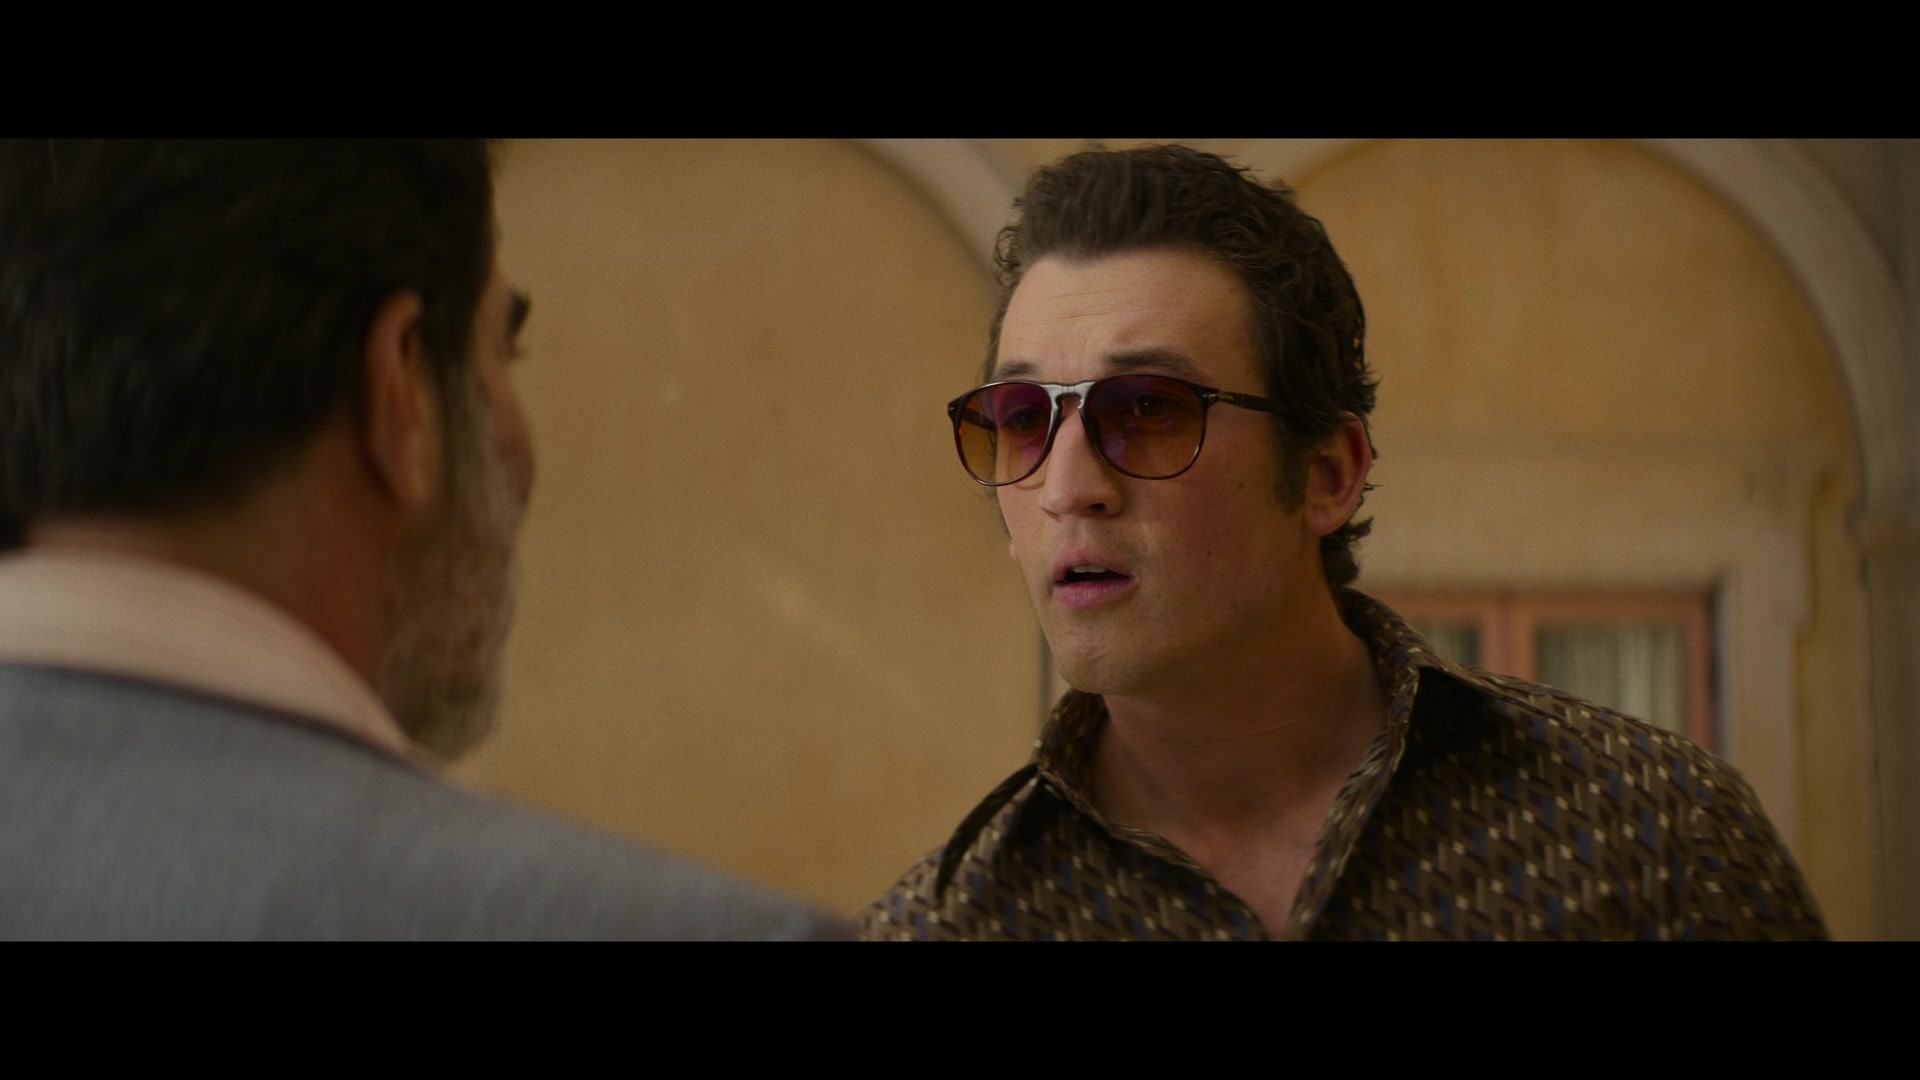 What Sunglasses is Miles Teller (Albert Ruddy) Wearing In The Offer?